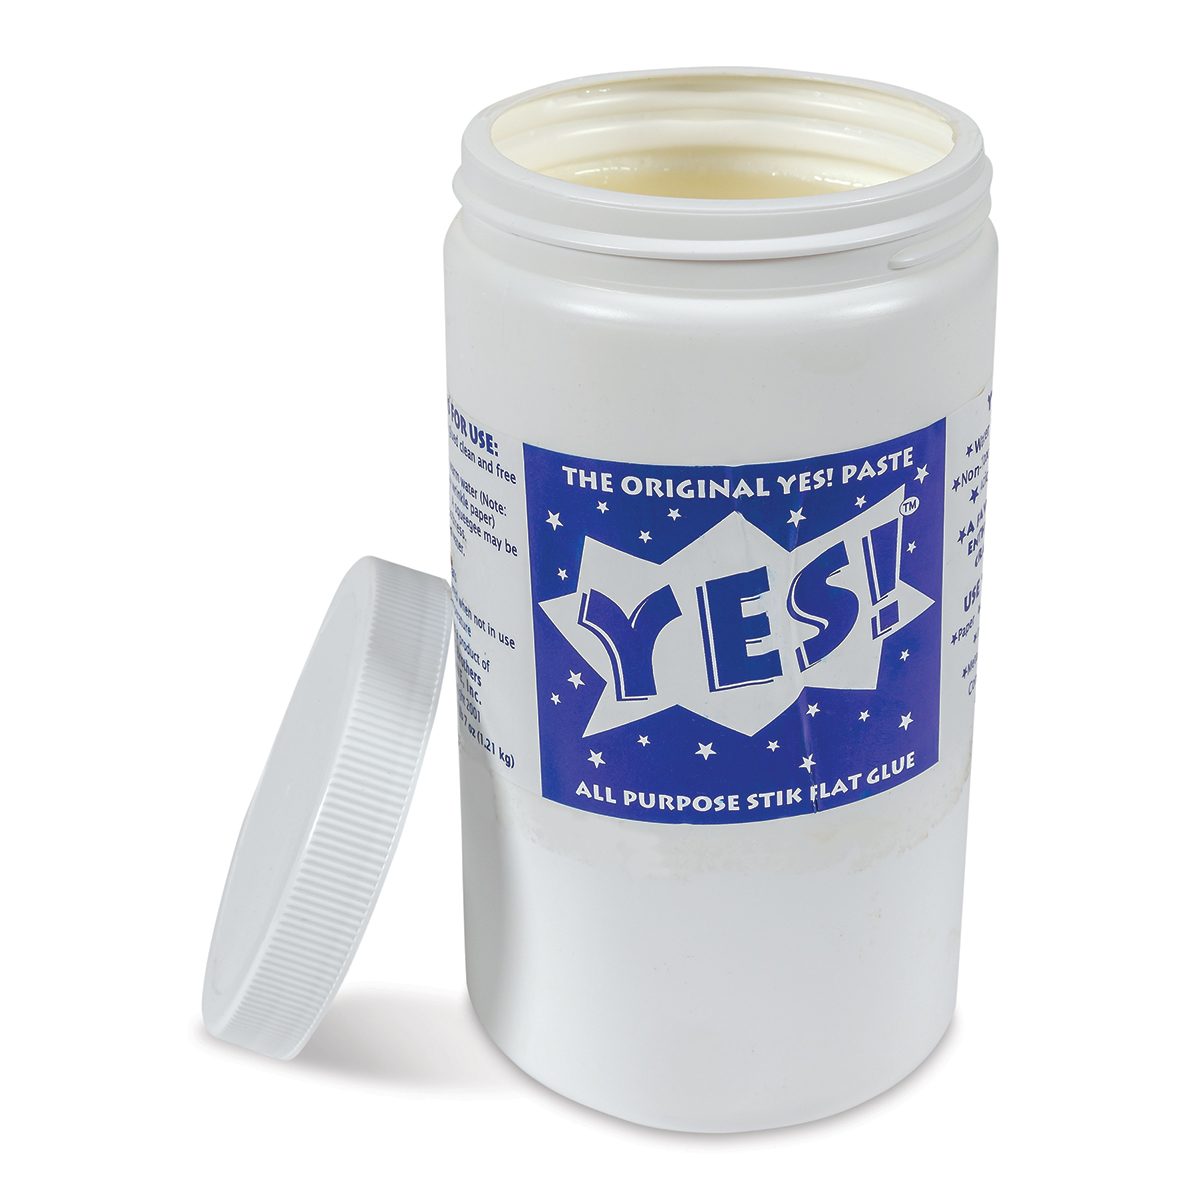 Throwing away the Yes paste